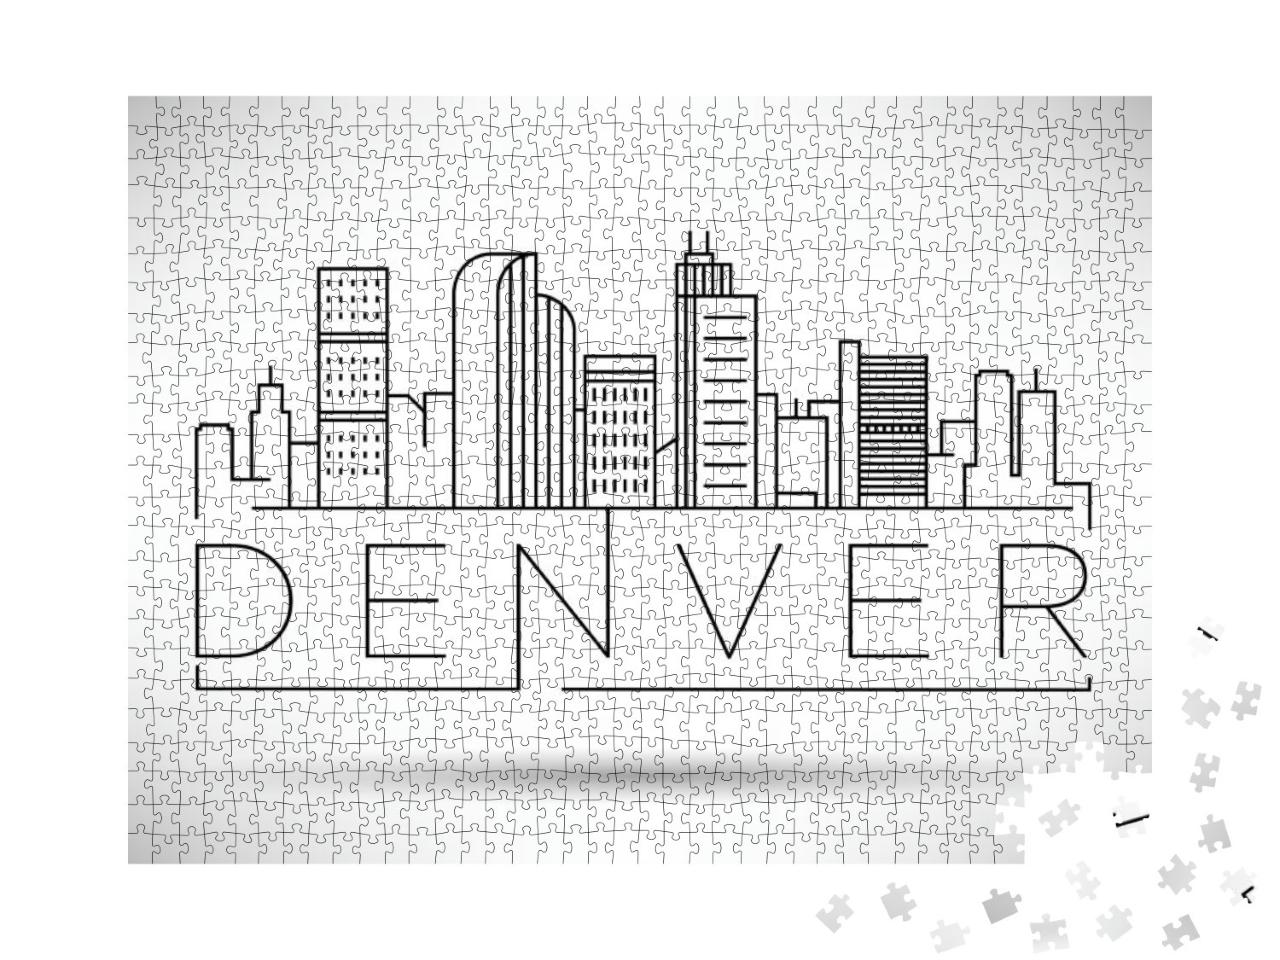 Minimal Denver Linear City Skyline with Typographic Desig... Jigsaw Puzzle with 1000 pieces